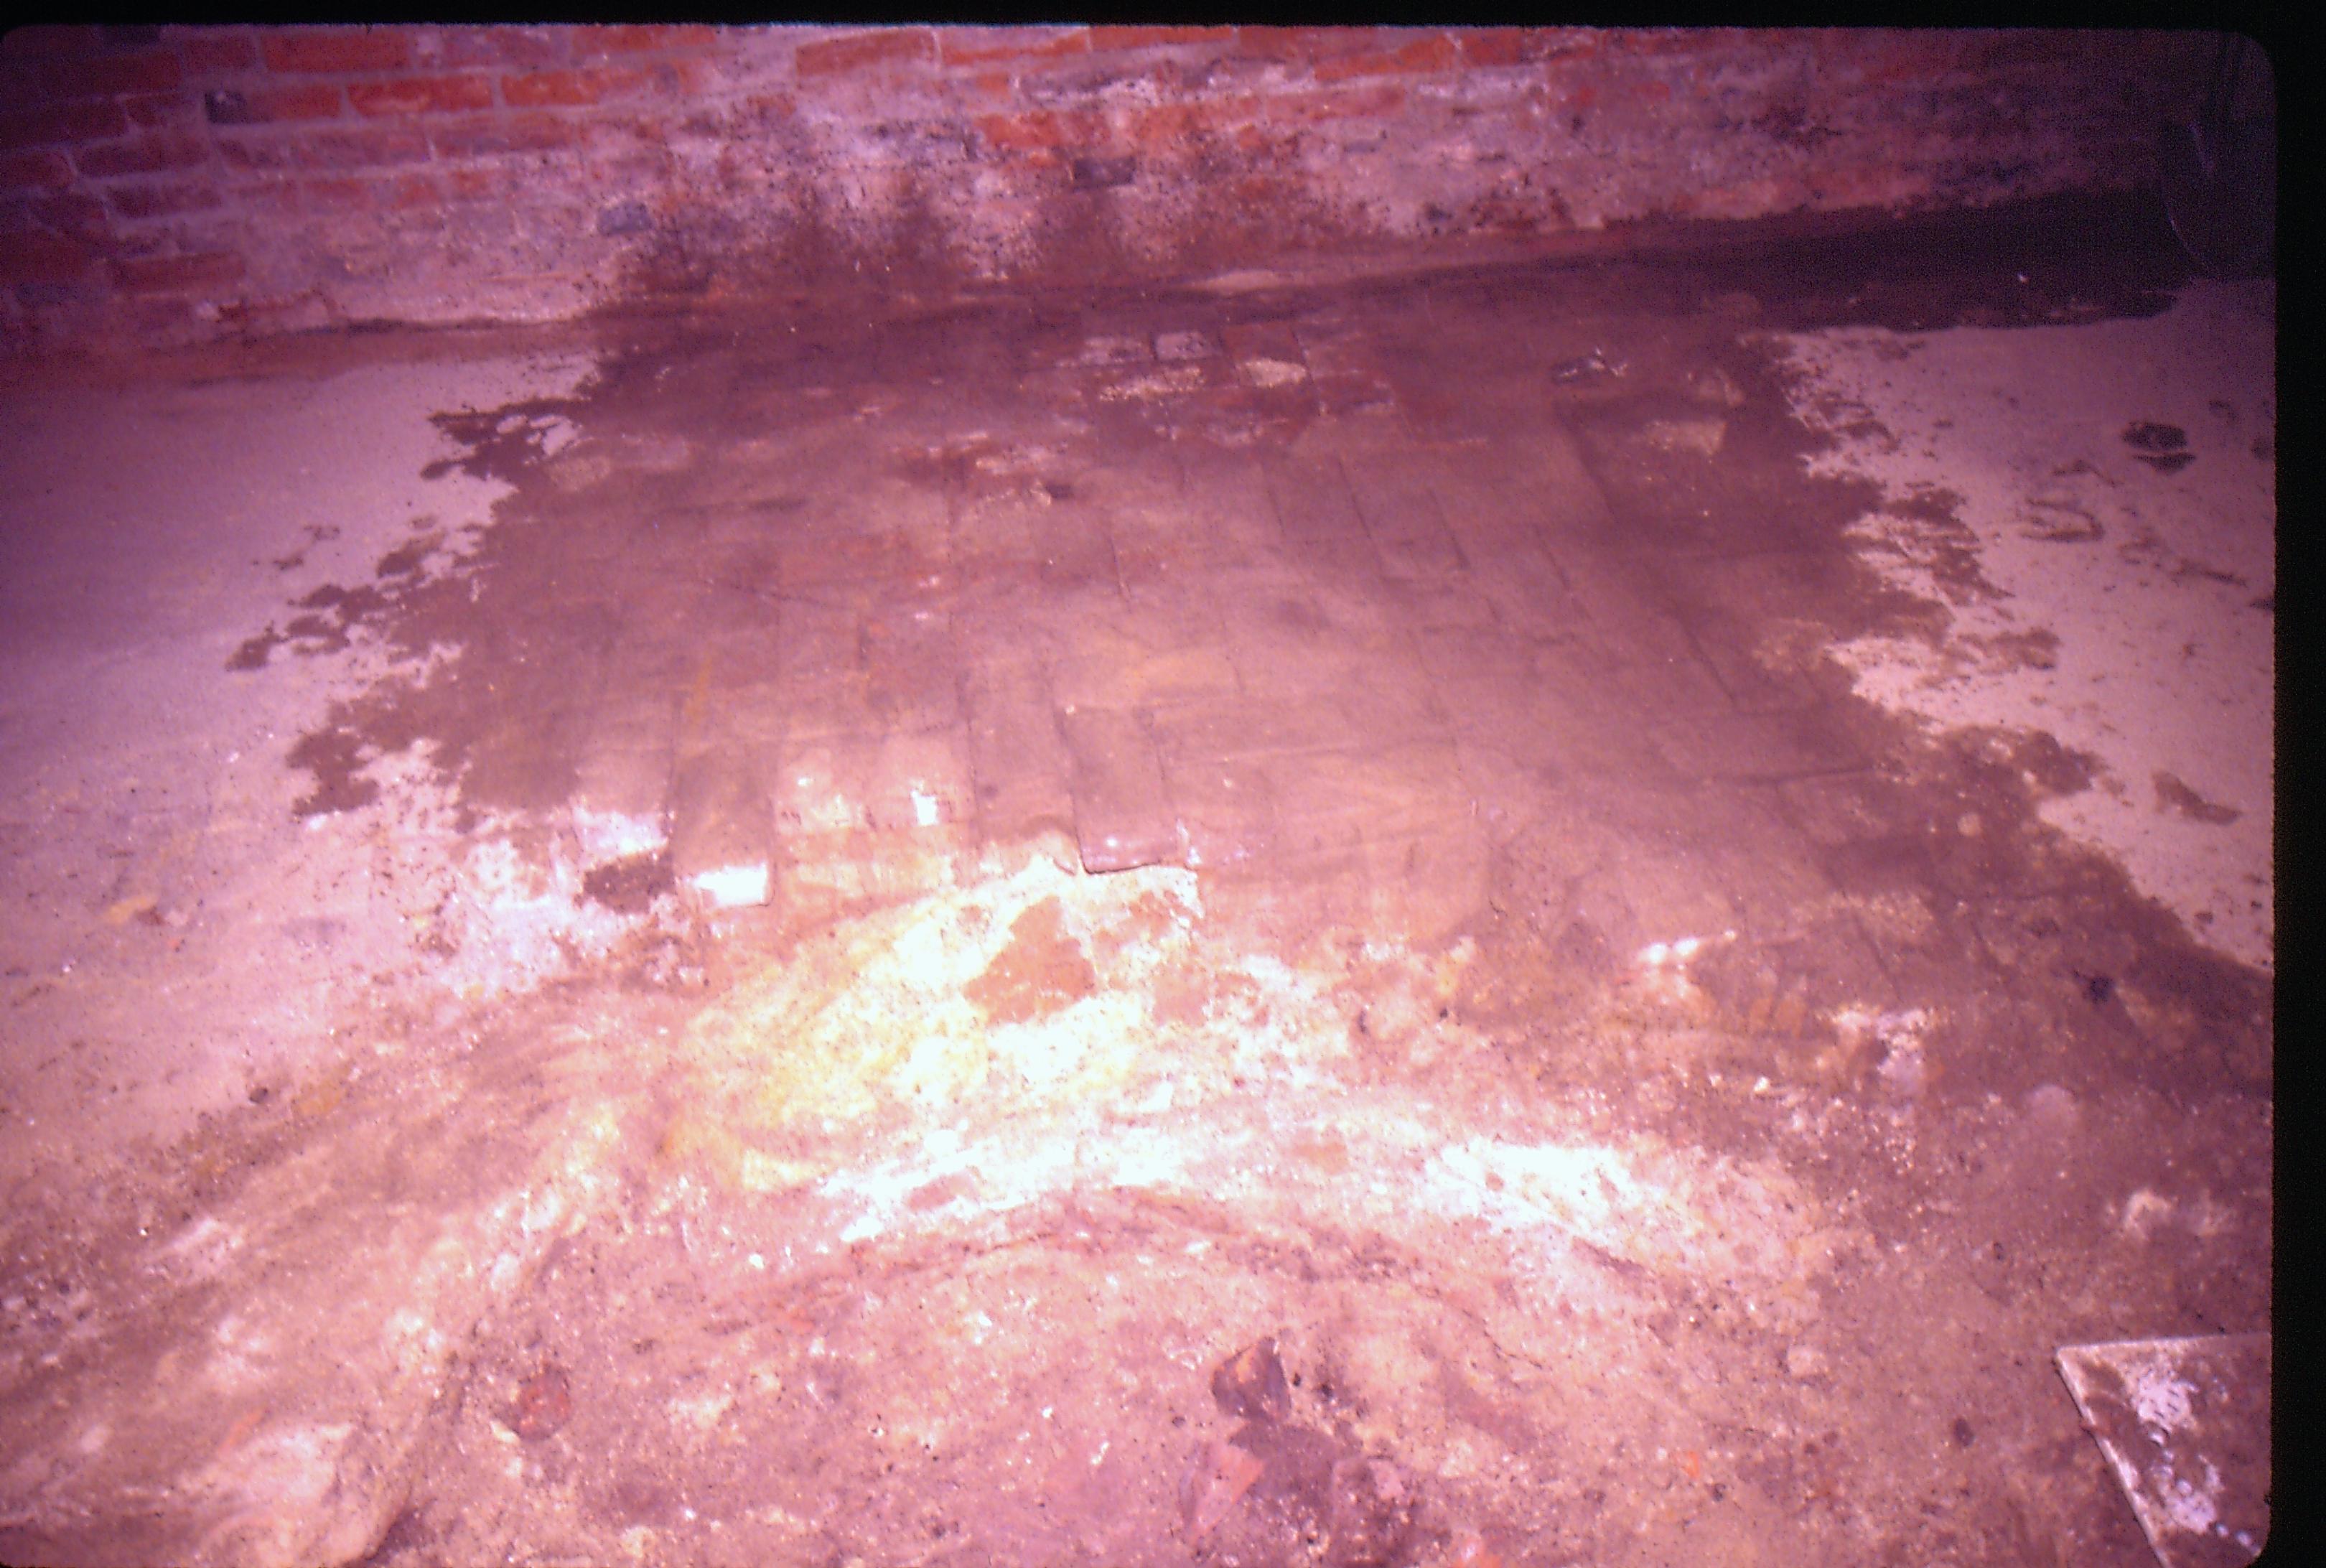 Lyon House - basement, brick pattern floor partially exposed near brick wall. Other flooring appears to be dirt and brick debris. Water stains from cleaning off brick floor. Looking East from basement Lyon, Basement, brick floor, brick wall